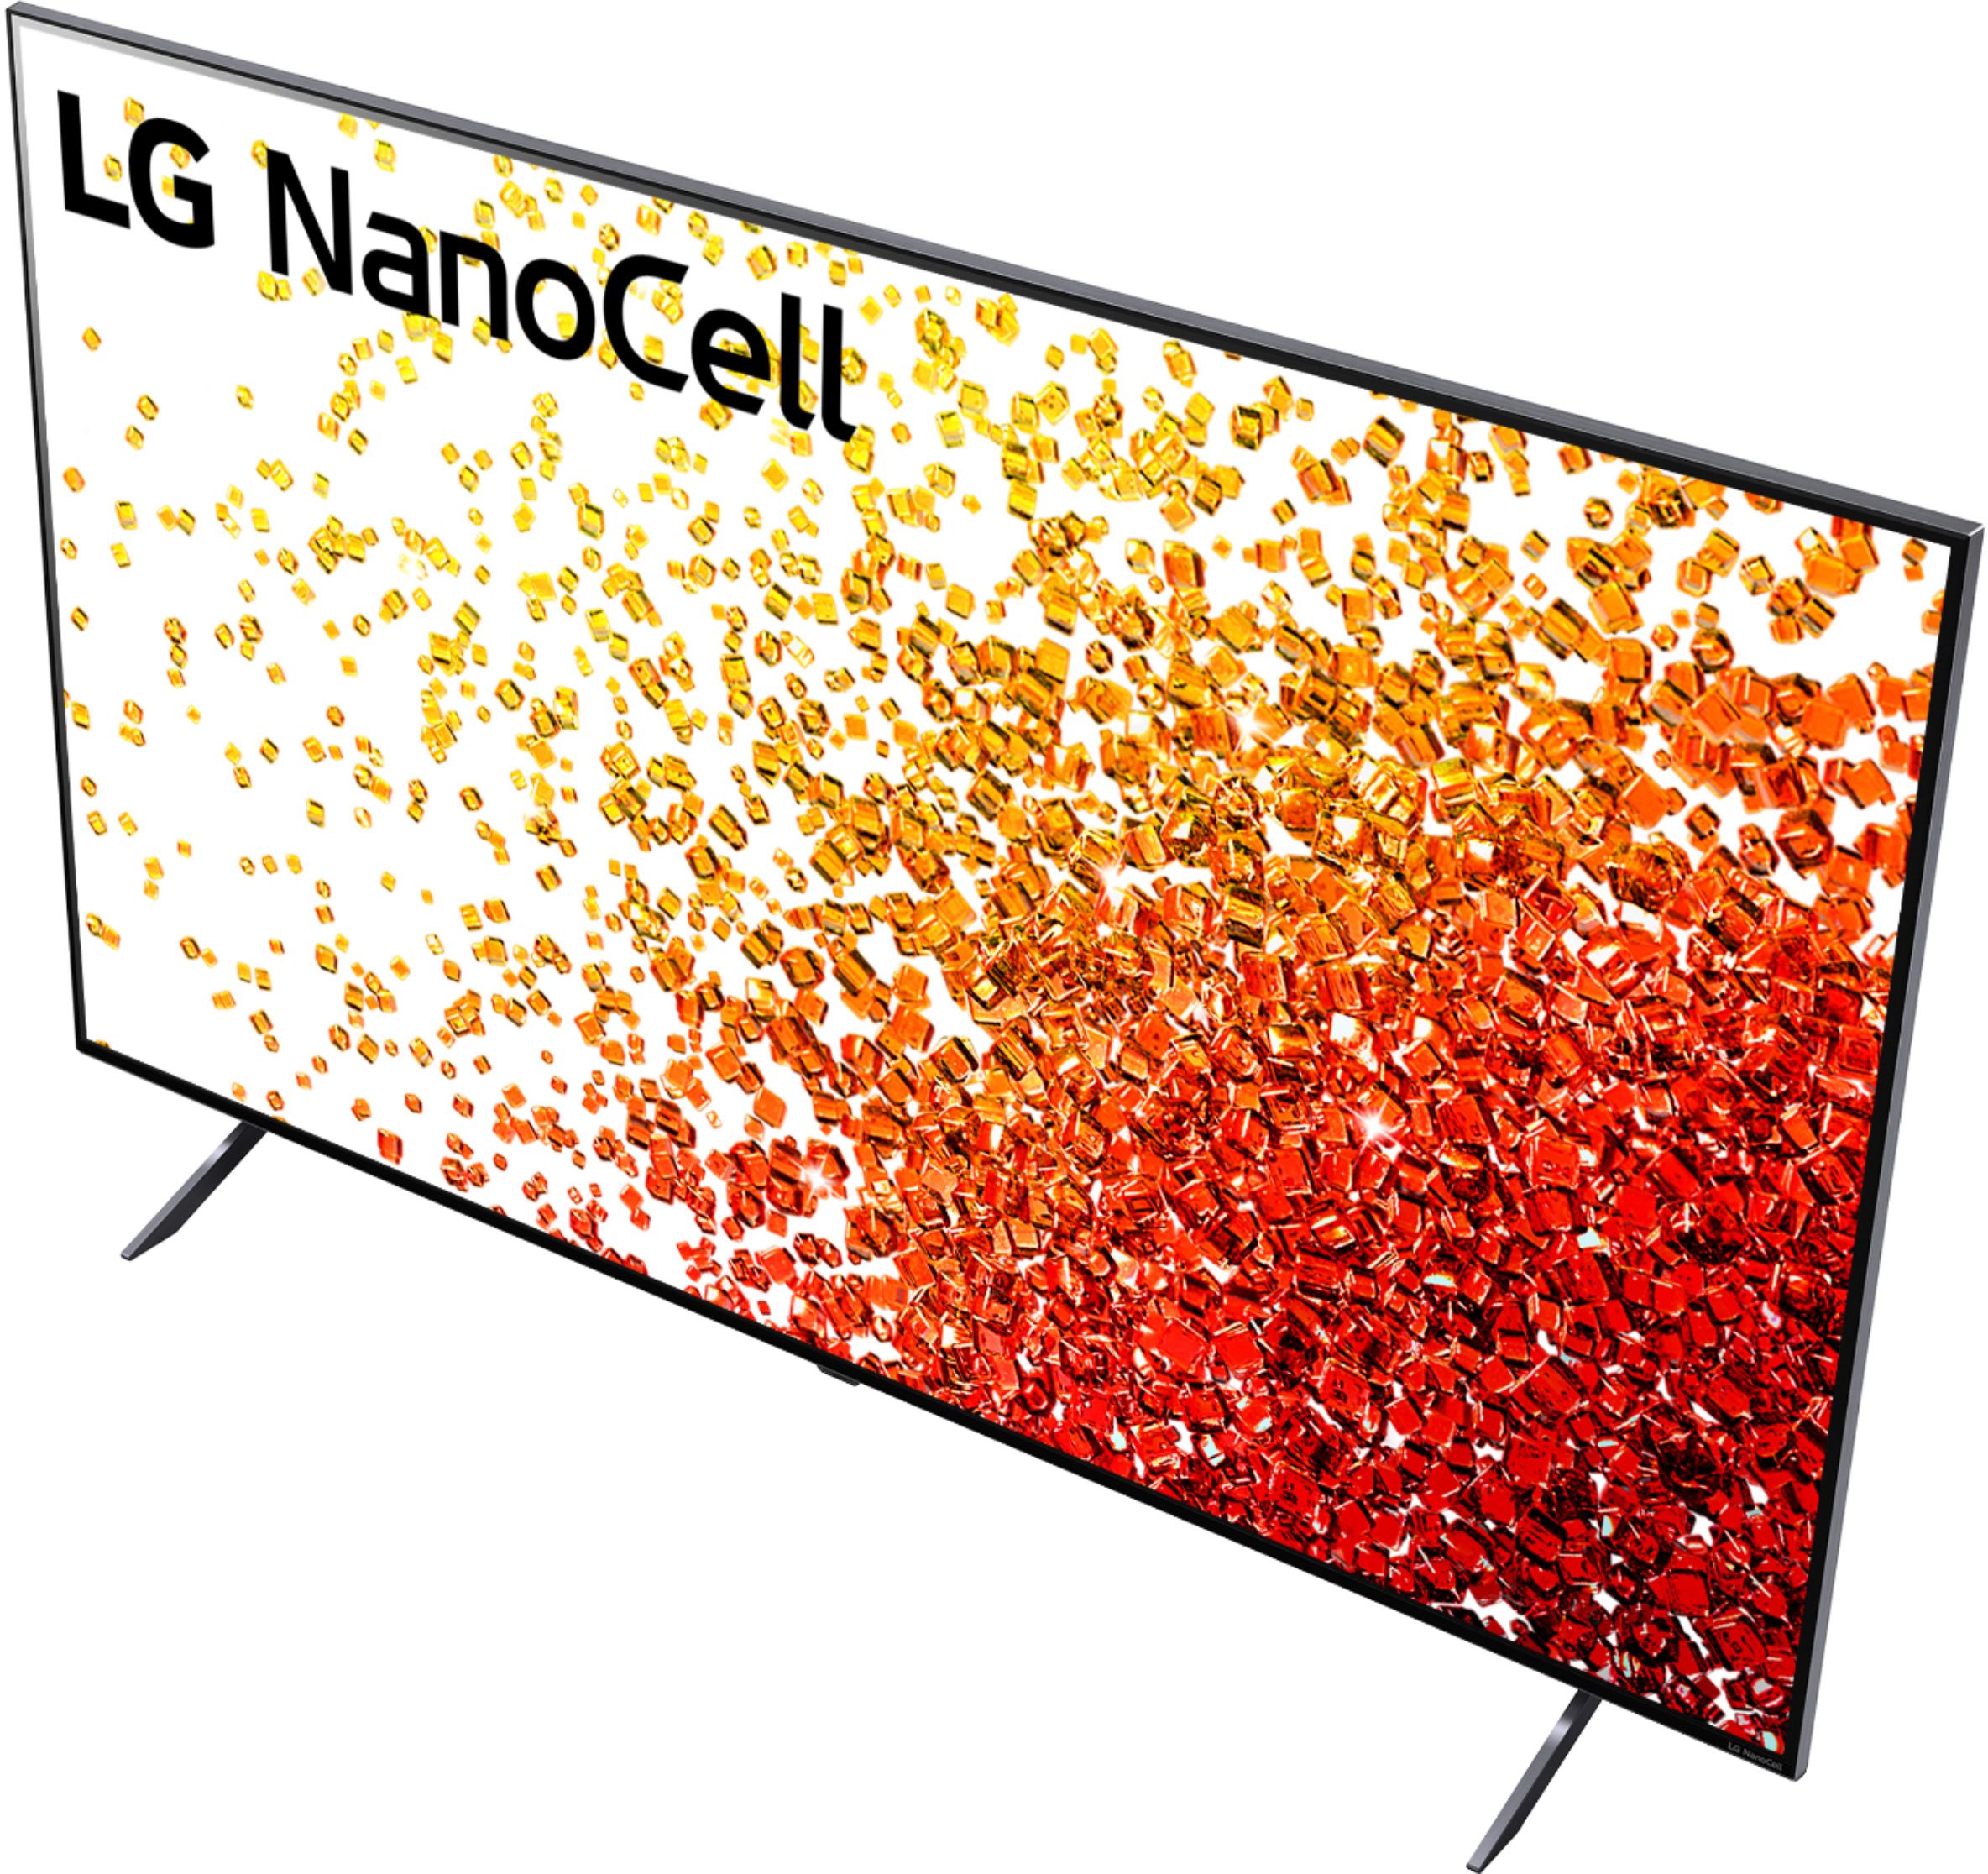 LG NanoCell 90 Series 65-inch UHD Smart TV Reviewed - My Site